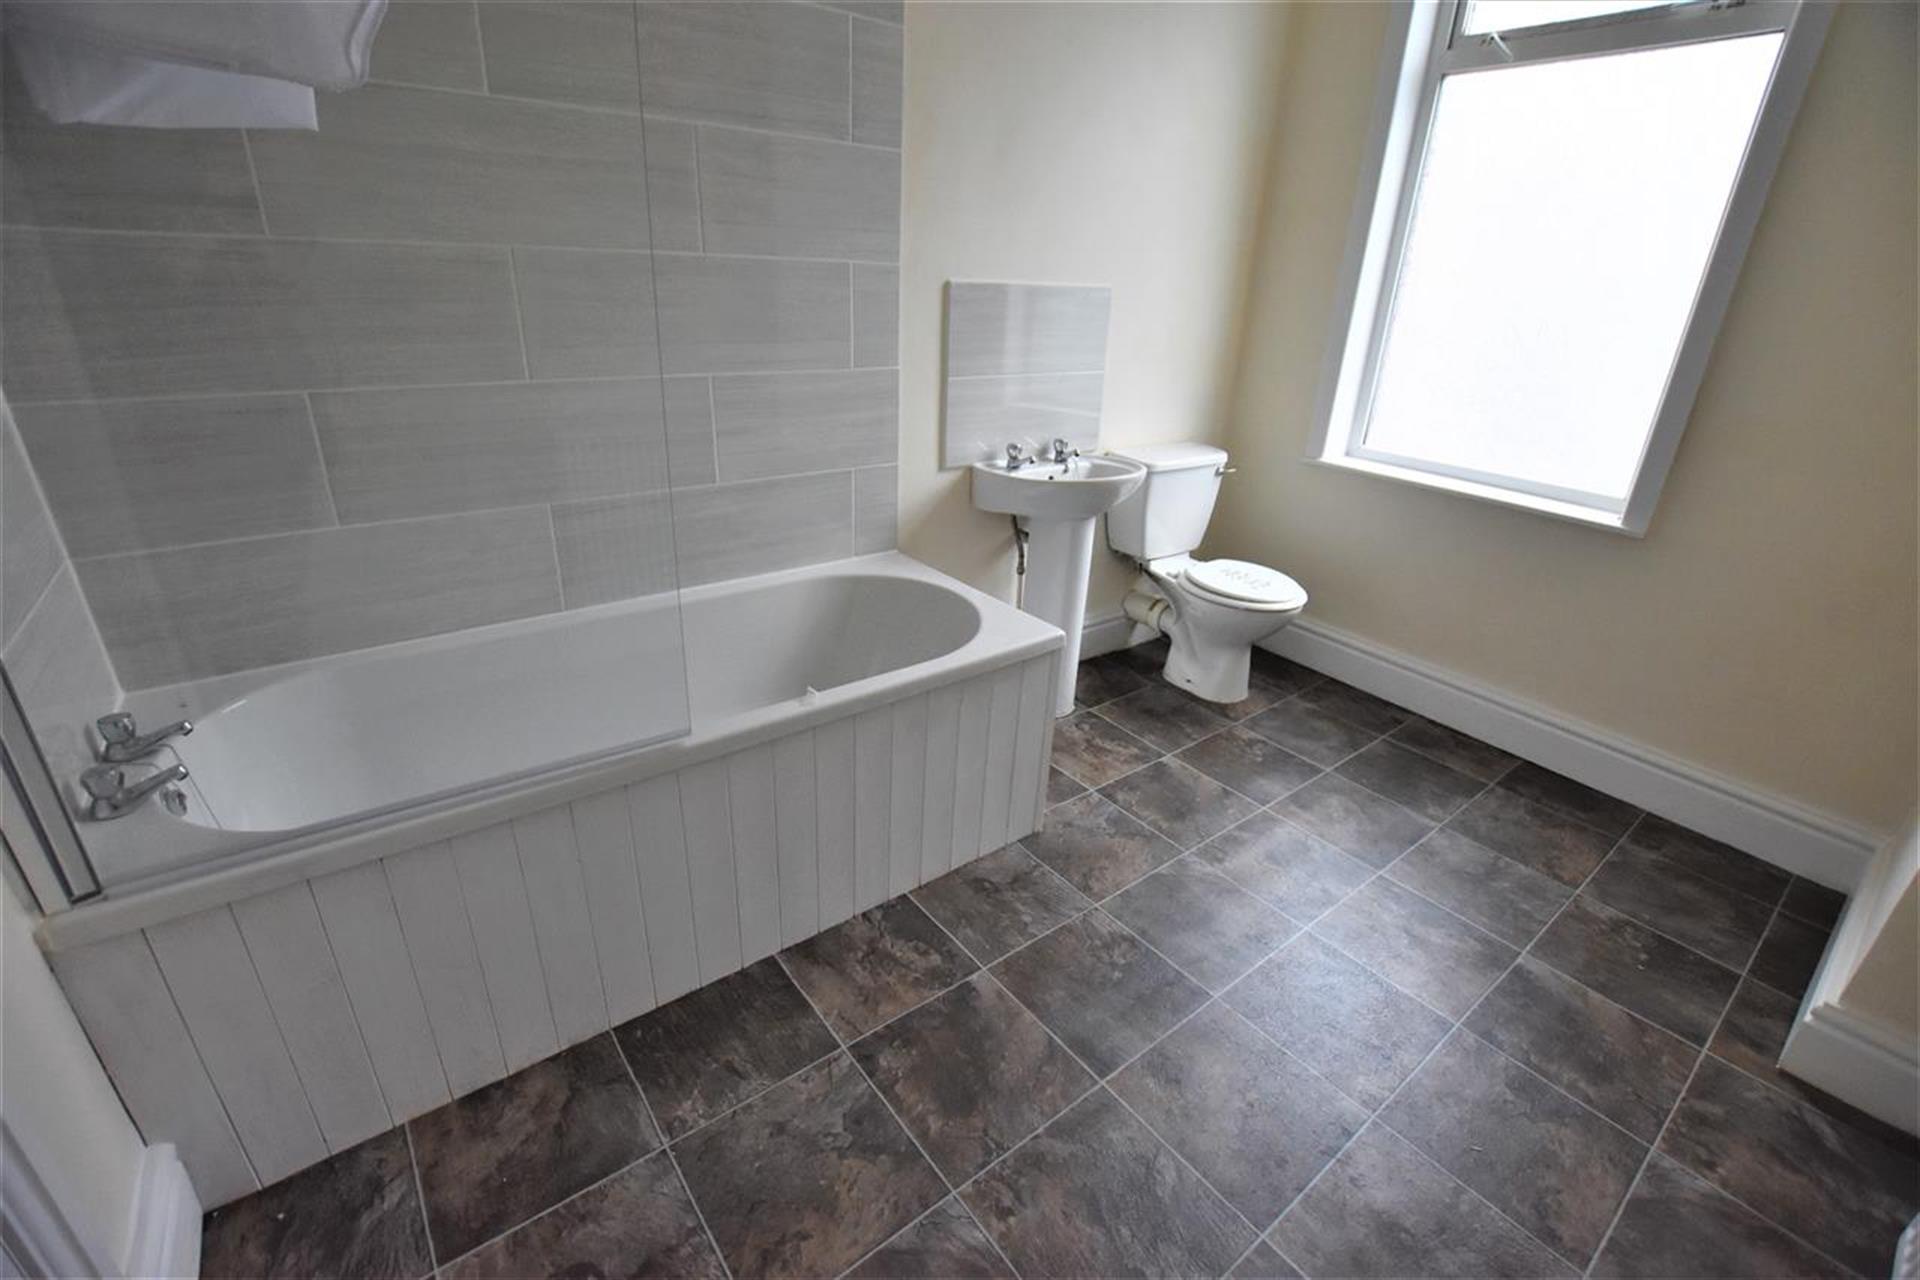 3 Bedroom End Terraced House To Rent - Bathroom